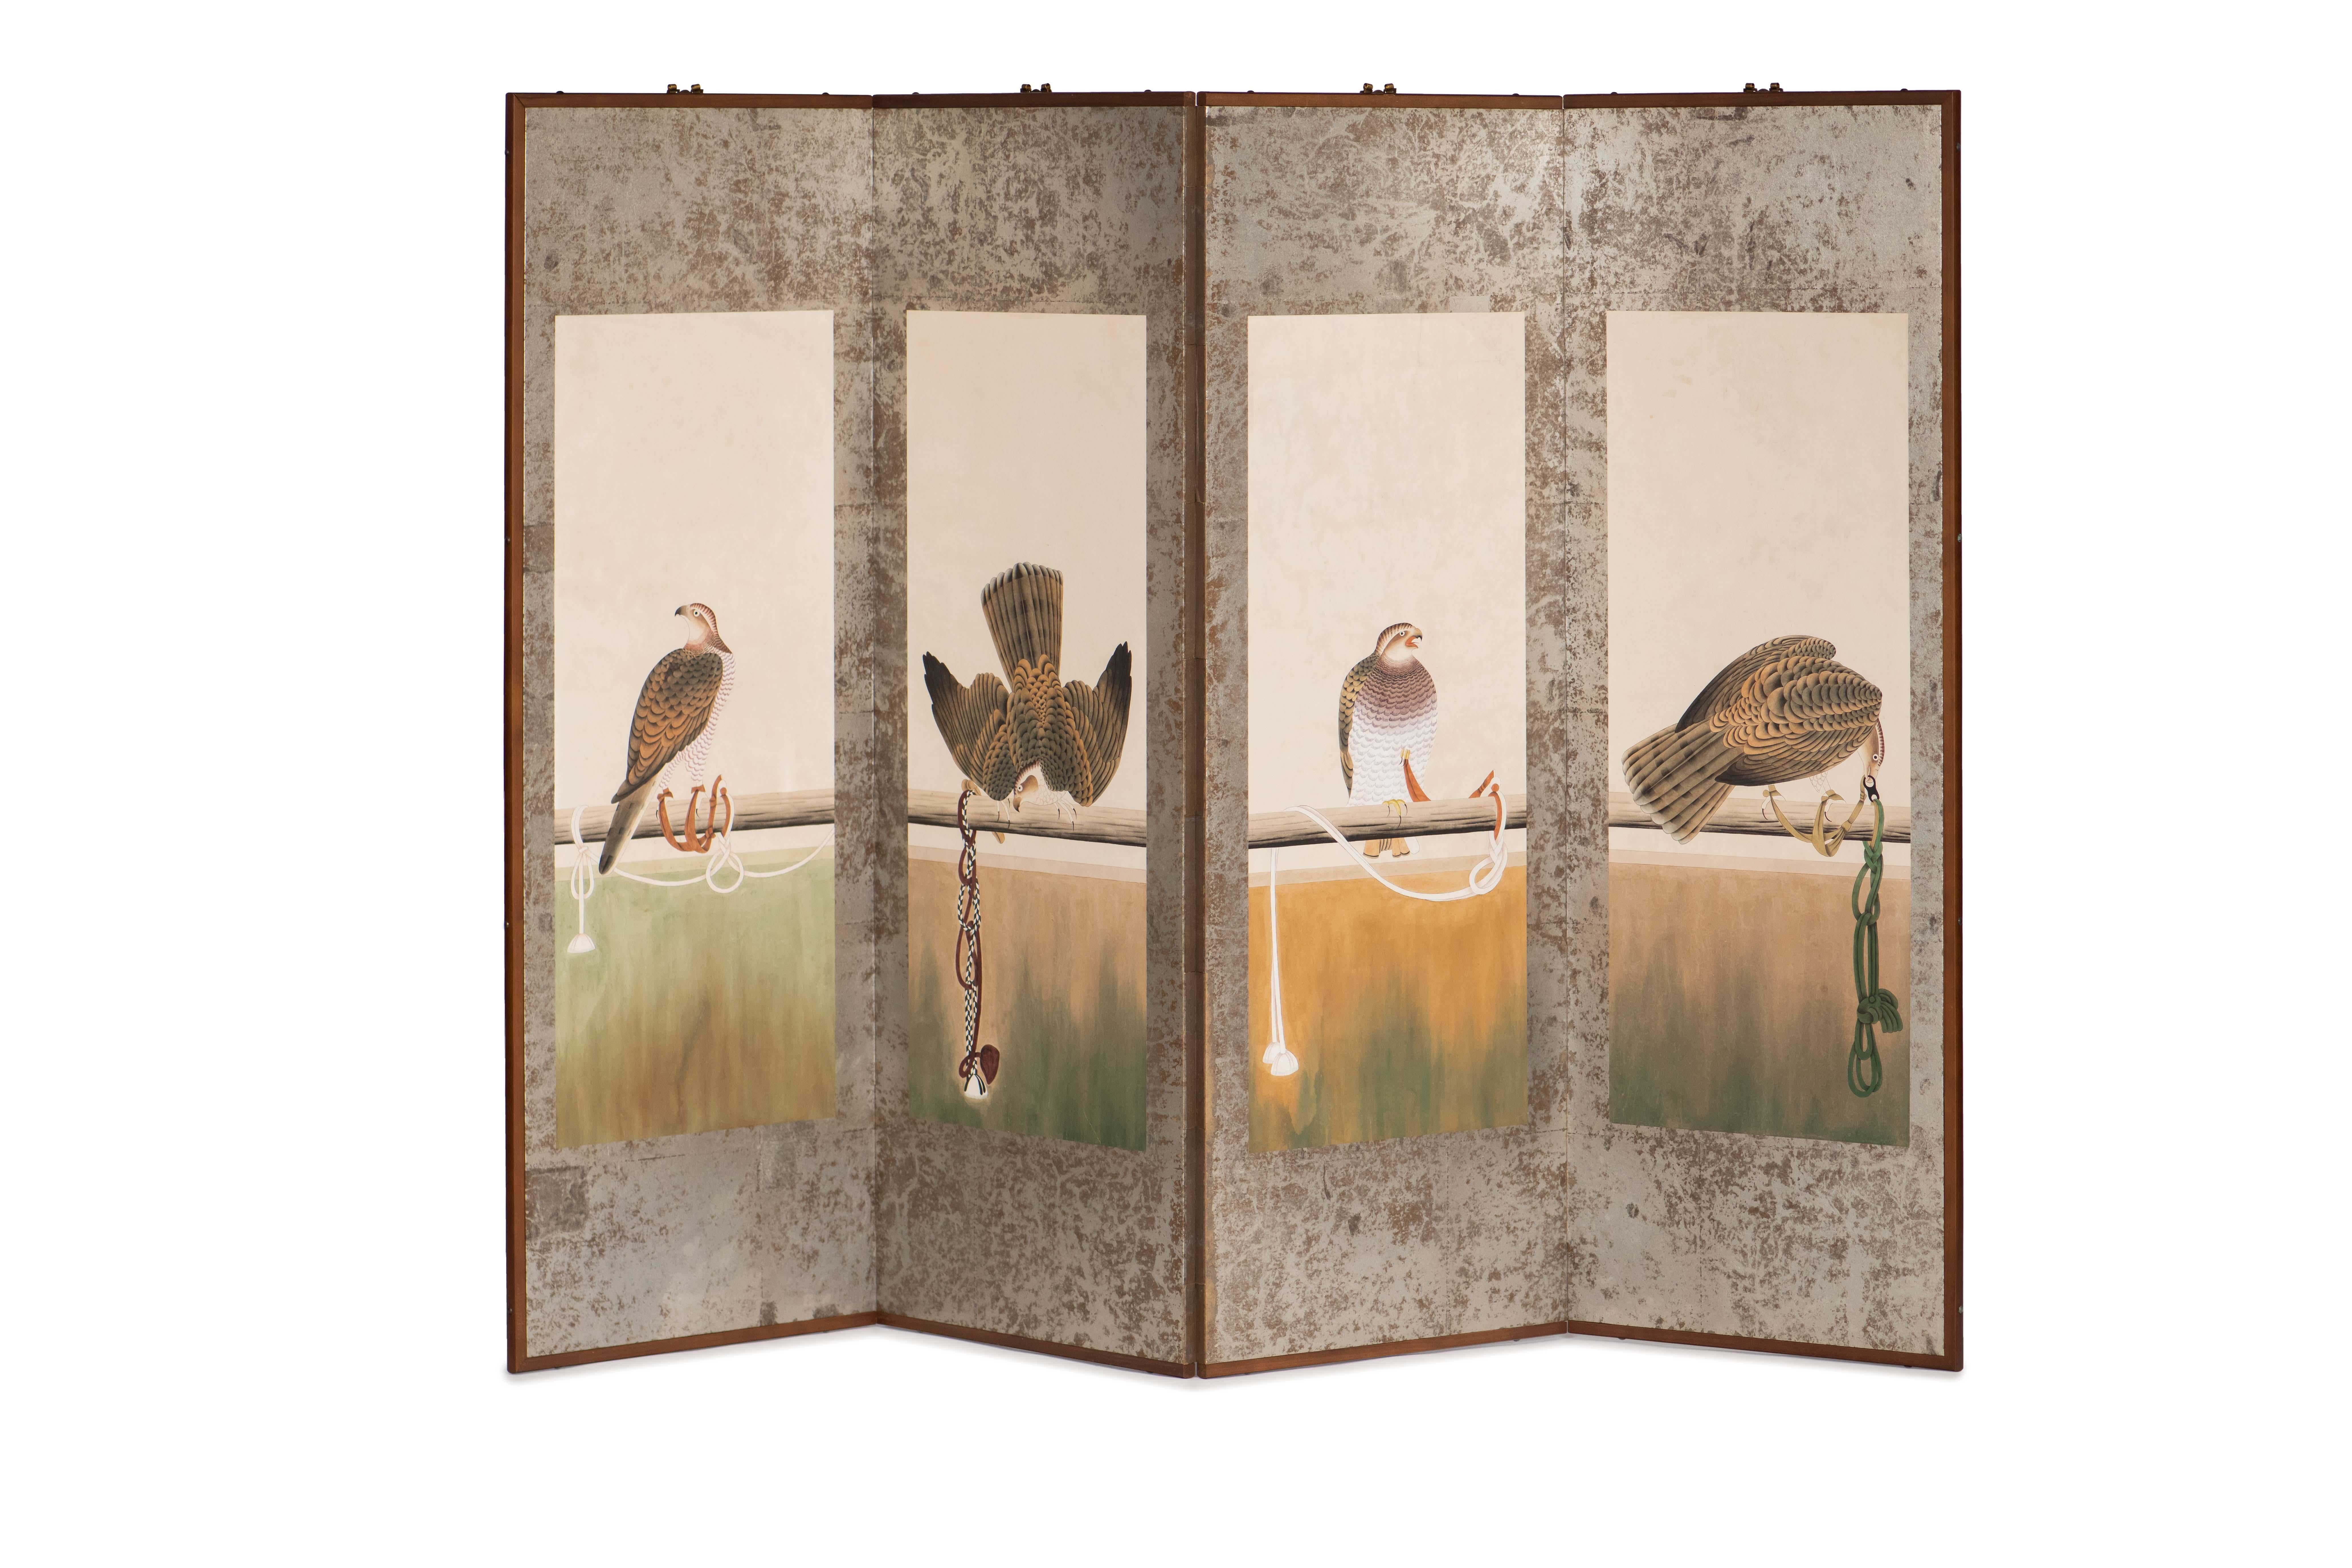 The hawks painting of this four-panel screen is hand-painted in watercolor, on squares of silver leaf which are applied by hand to the paper base over carefully jointed wooden lattice frames. Lacquer rails are then applied to the perimeter to finish